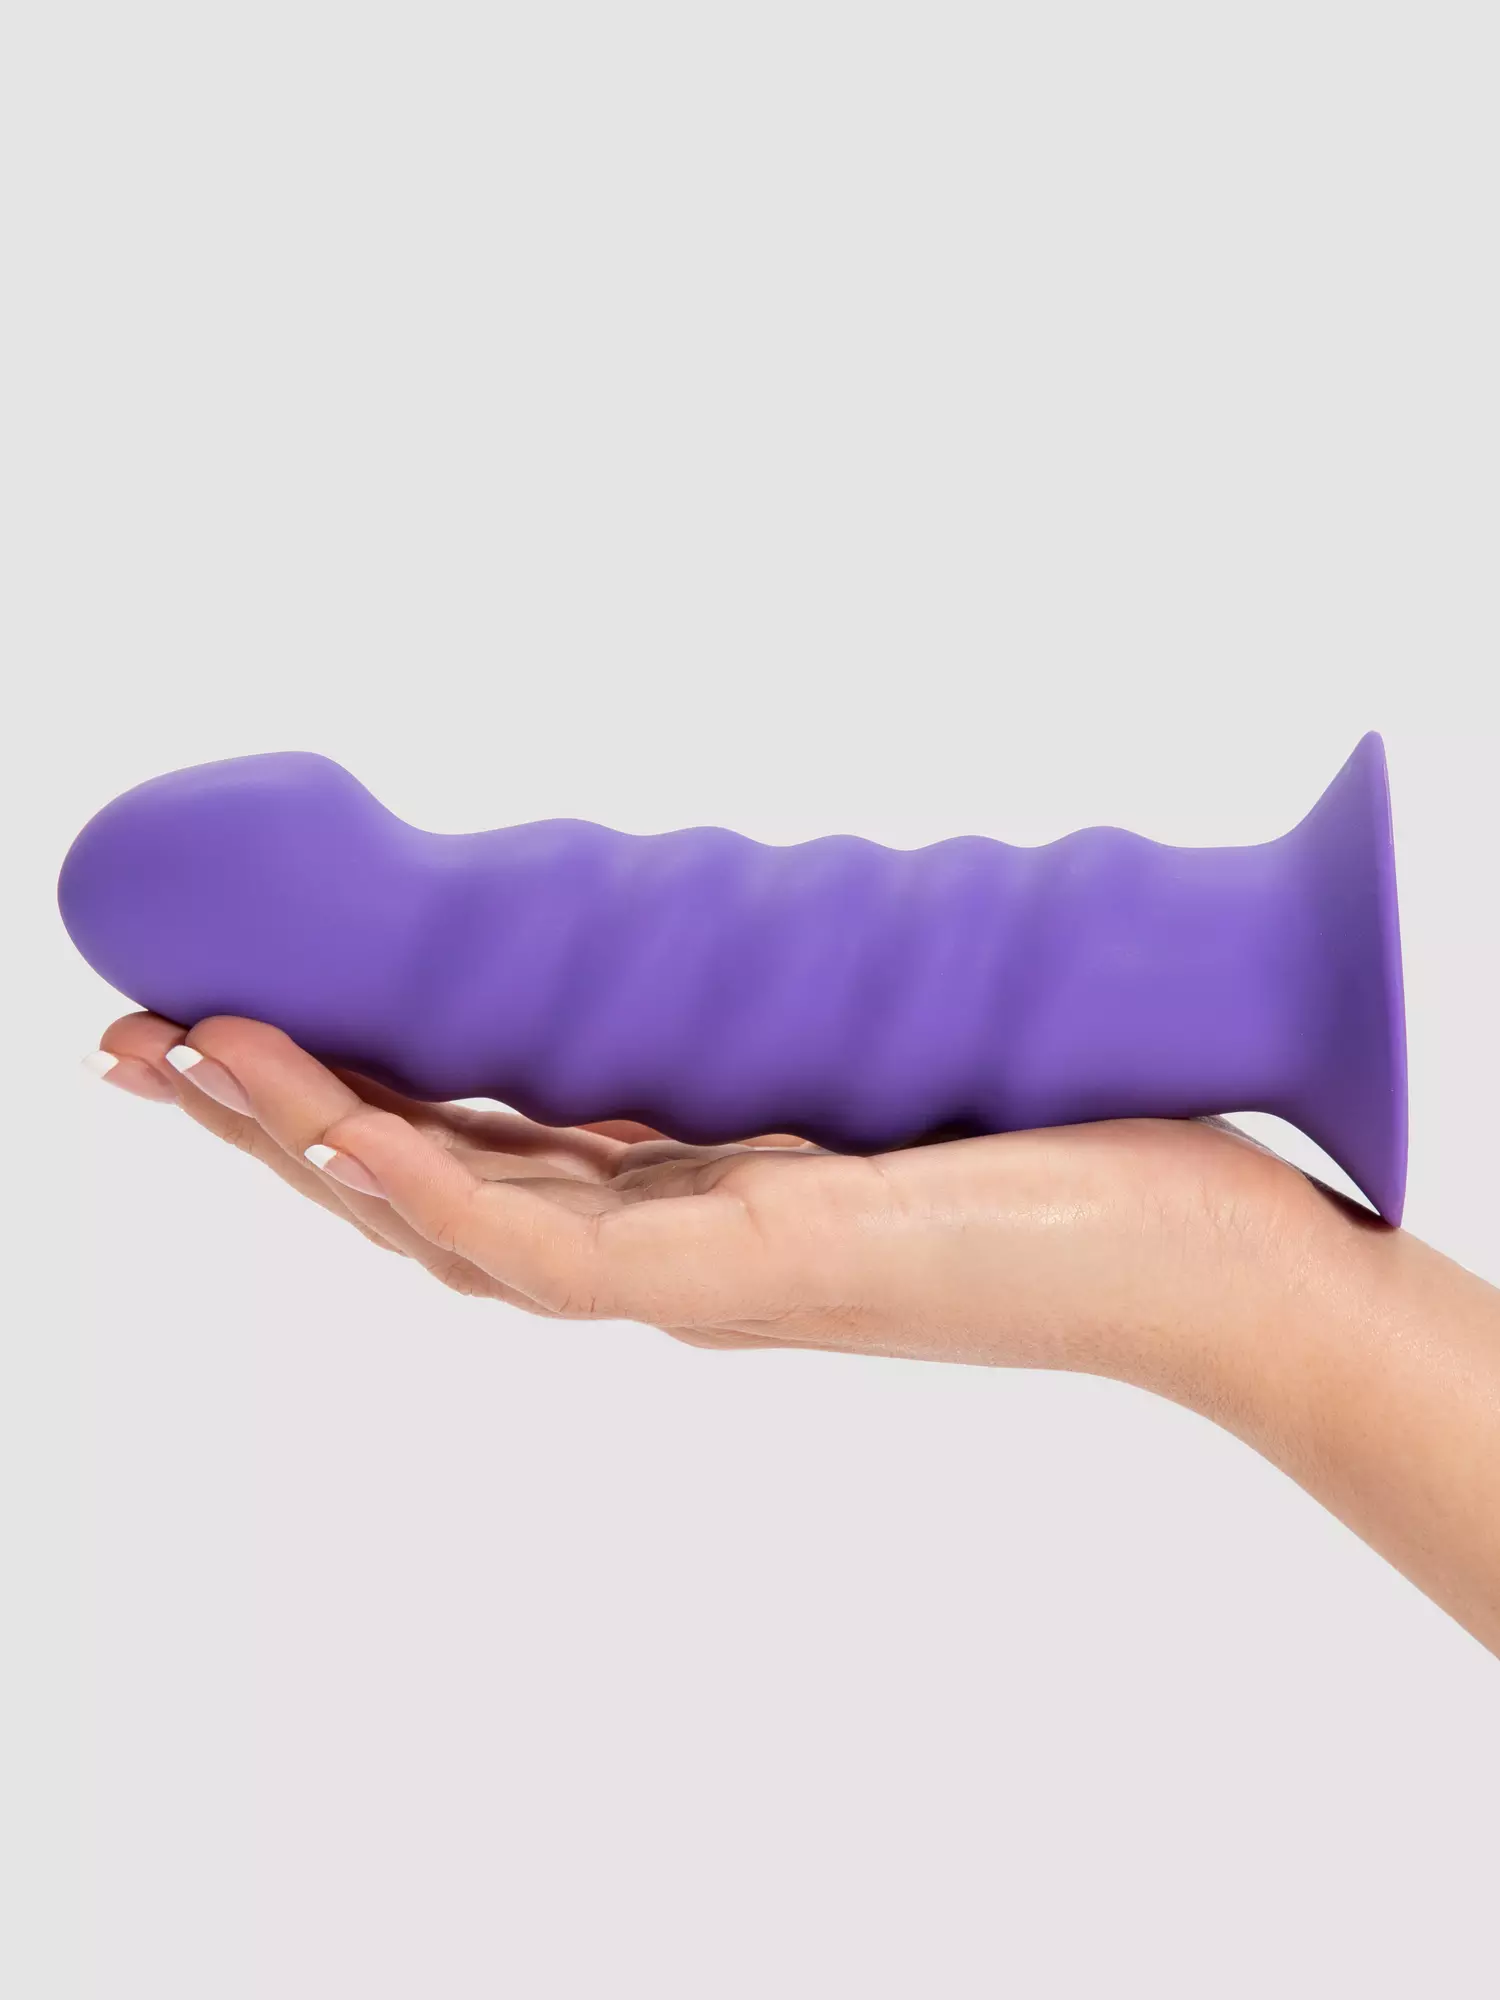 Maia Kendall Swirly Silicone Suction Cup Dildo. Slide 10